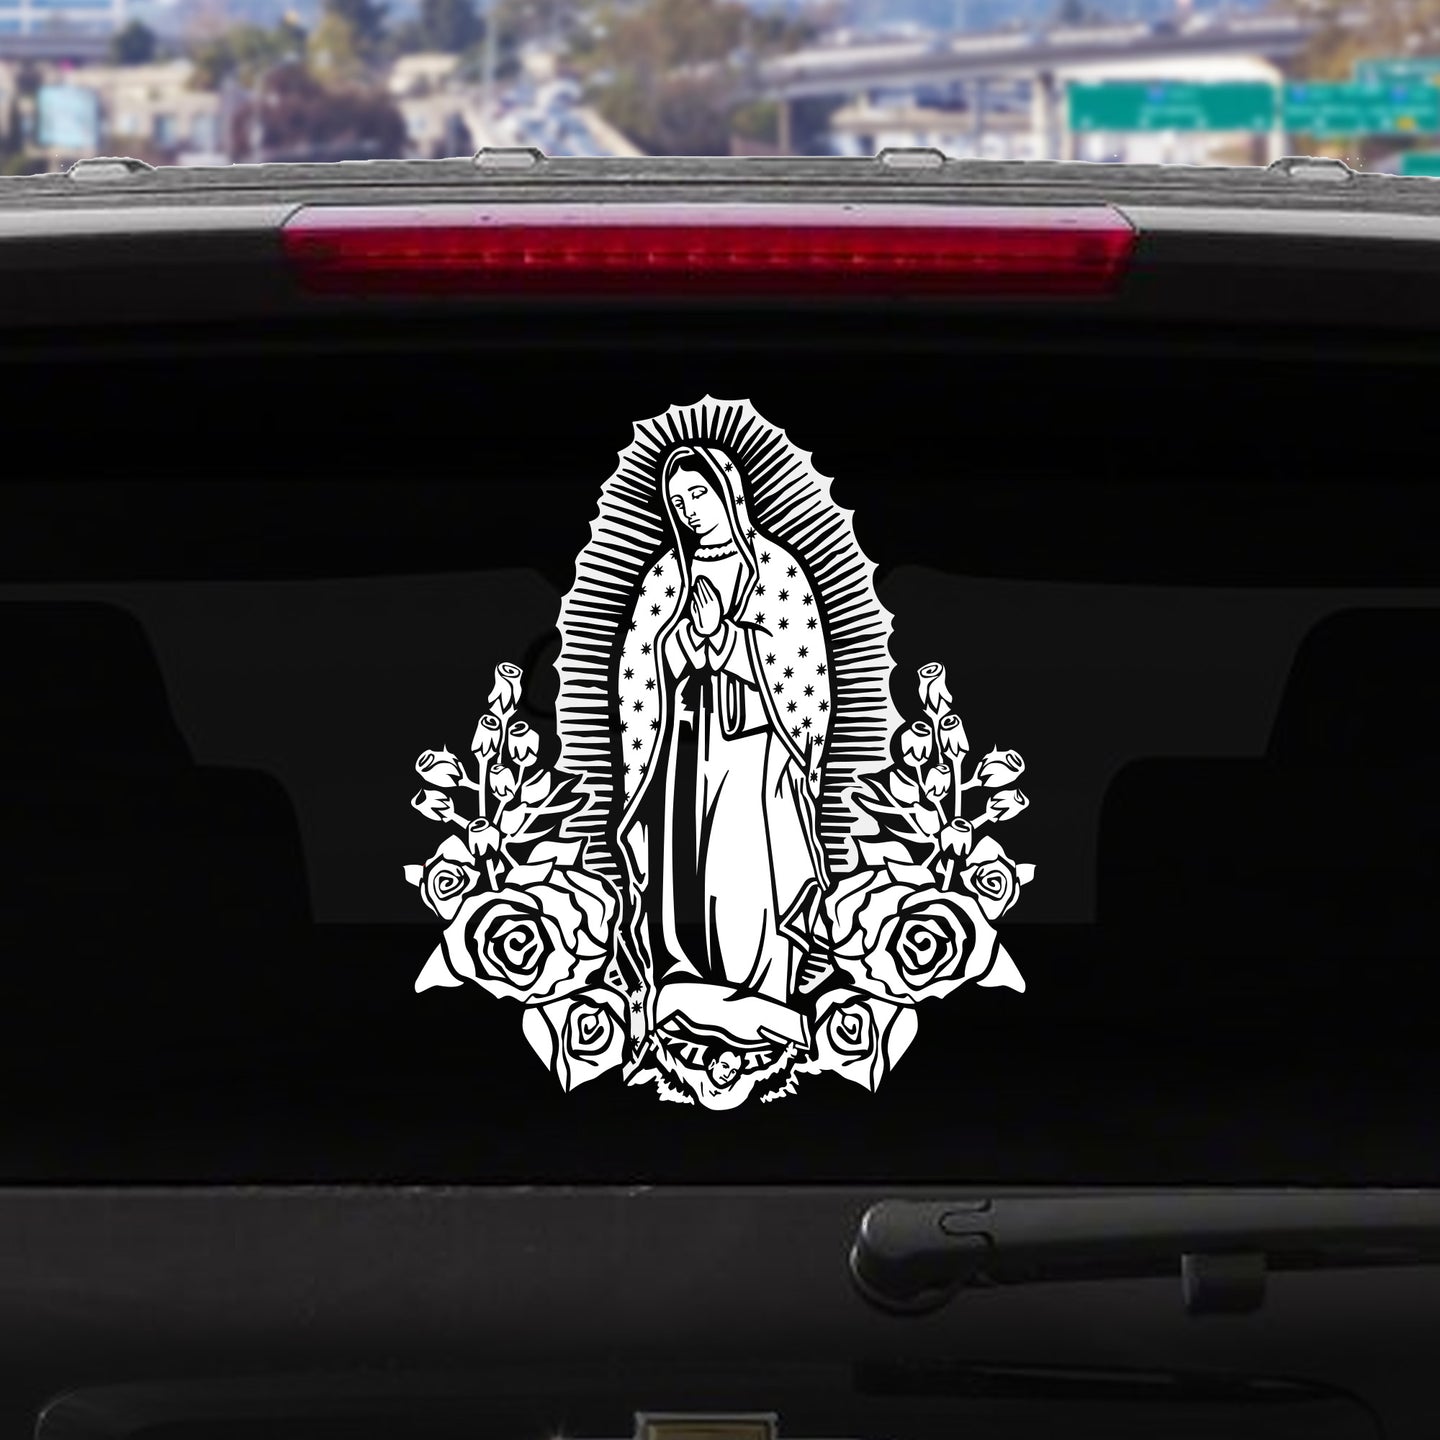 Virgin Mary Decal With Flowers Sticker for your Car - Virgen de Guadalupe Stickers Con Flores